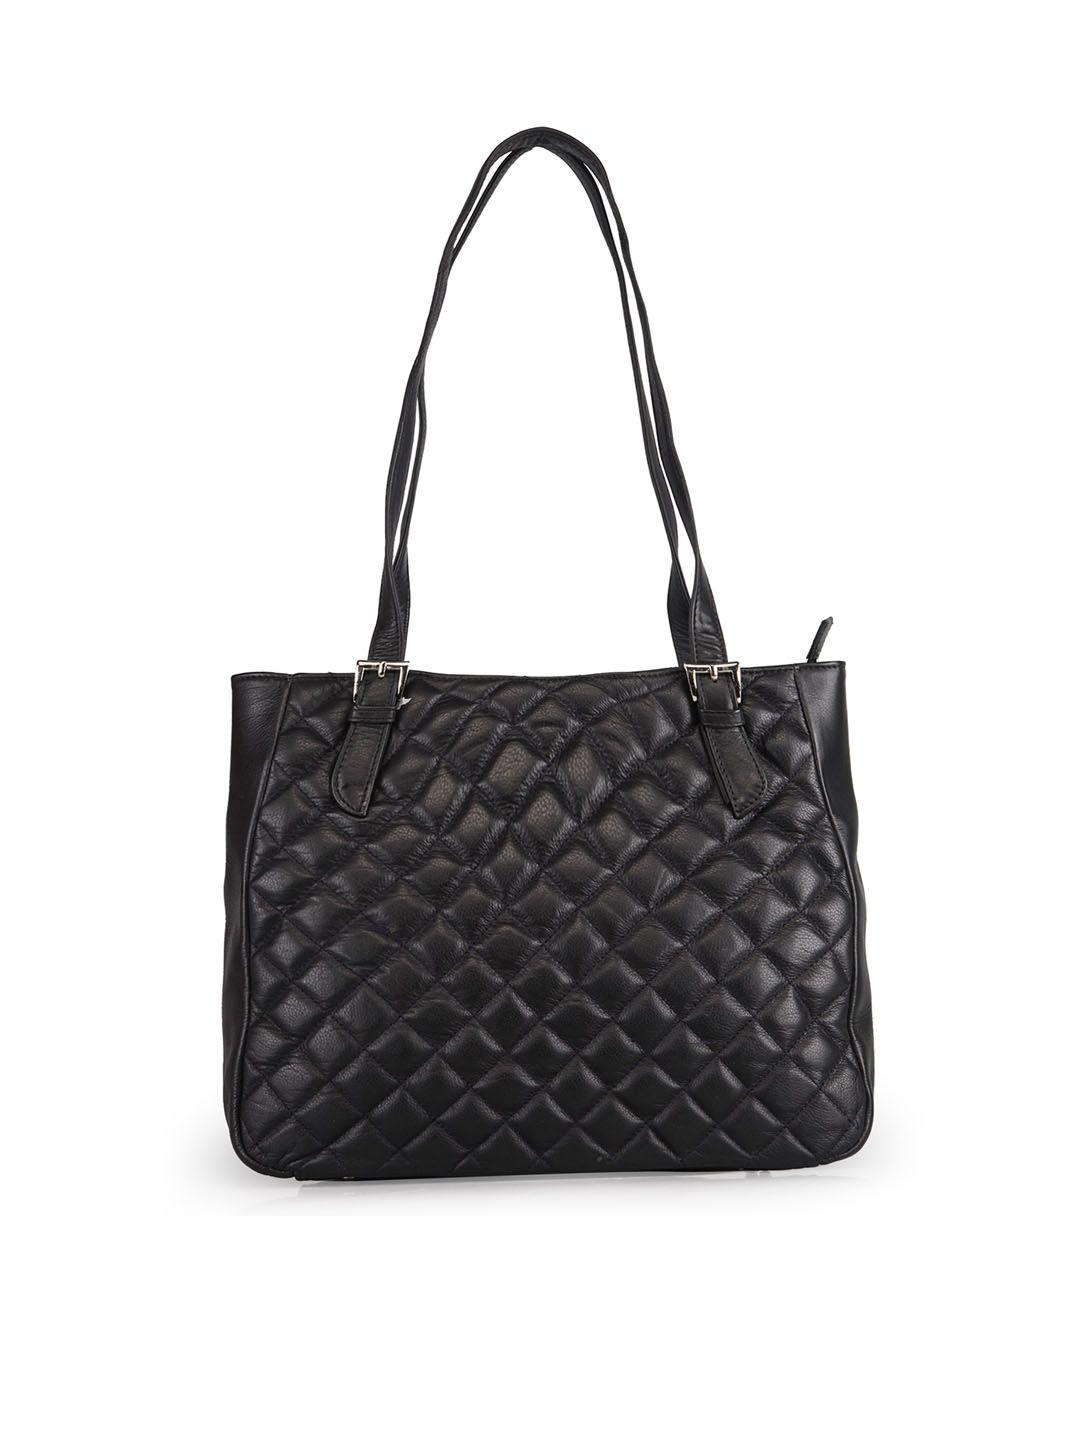 genwayne black leather structured handheld bag with quilted